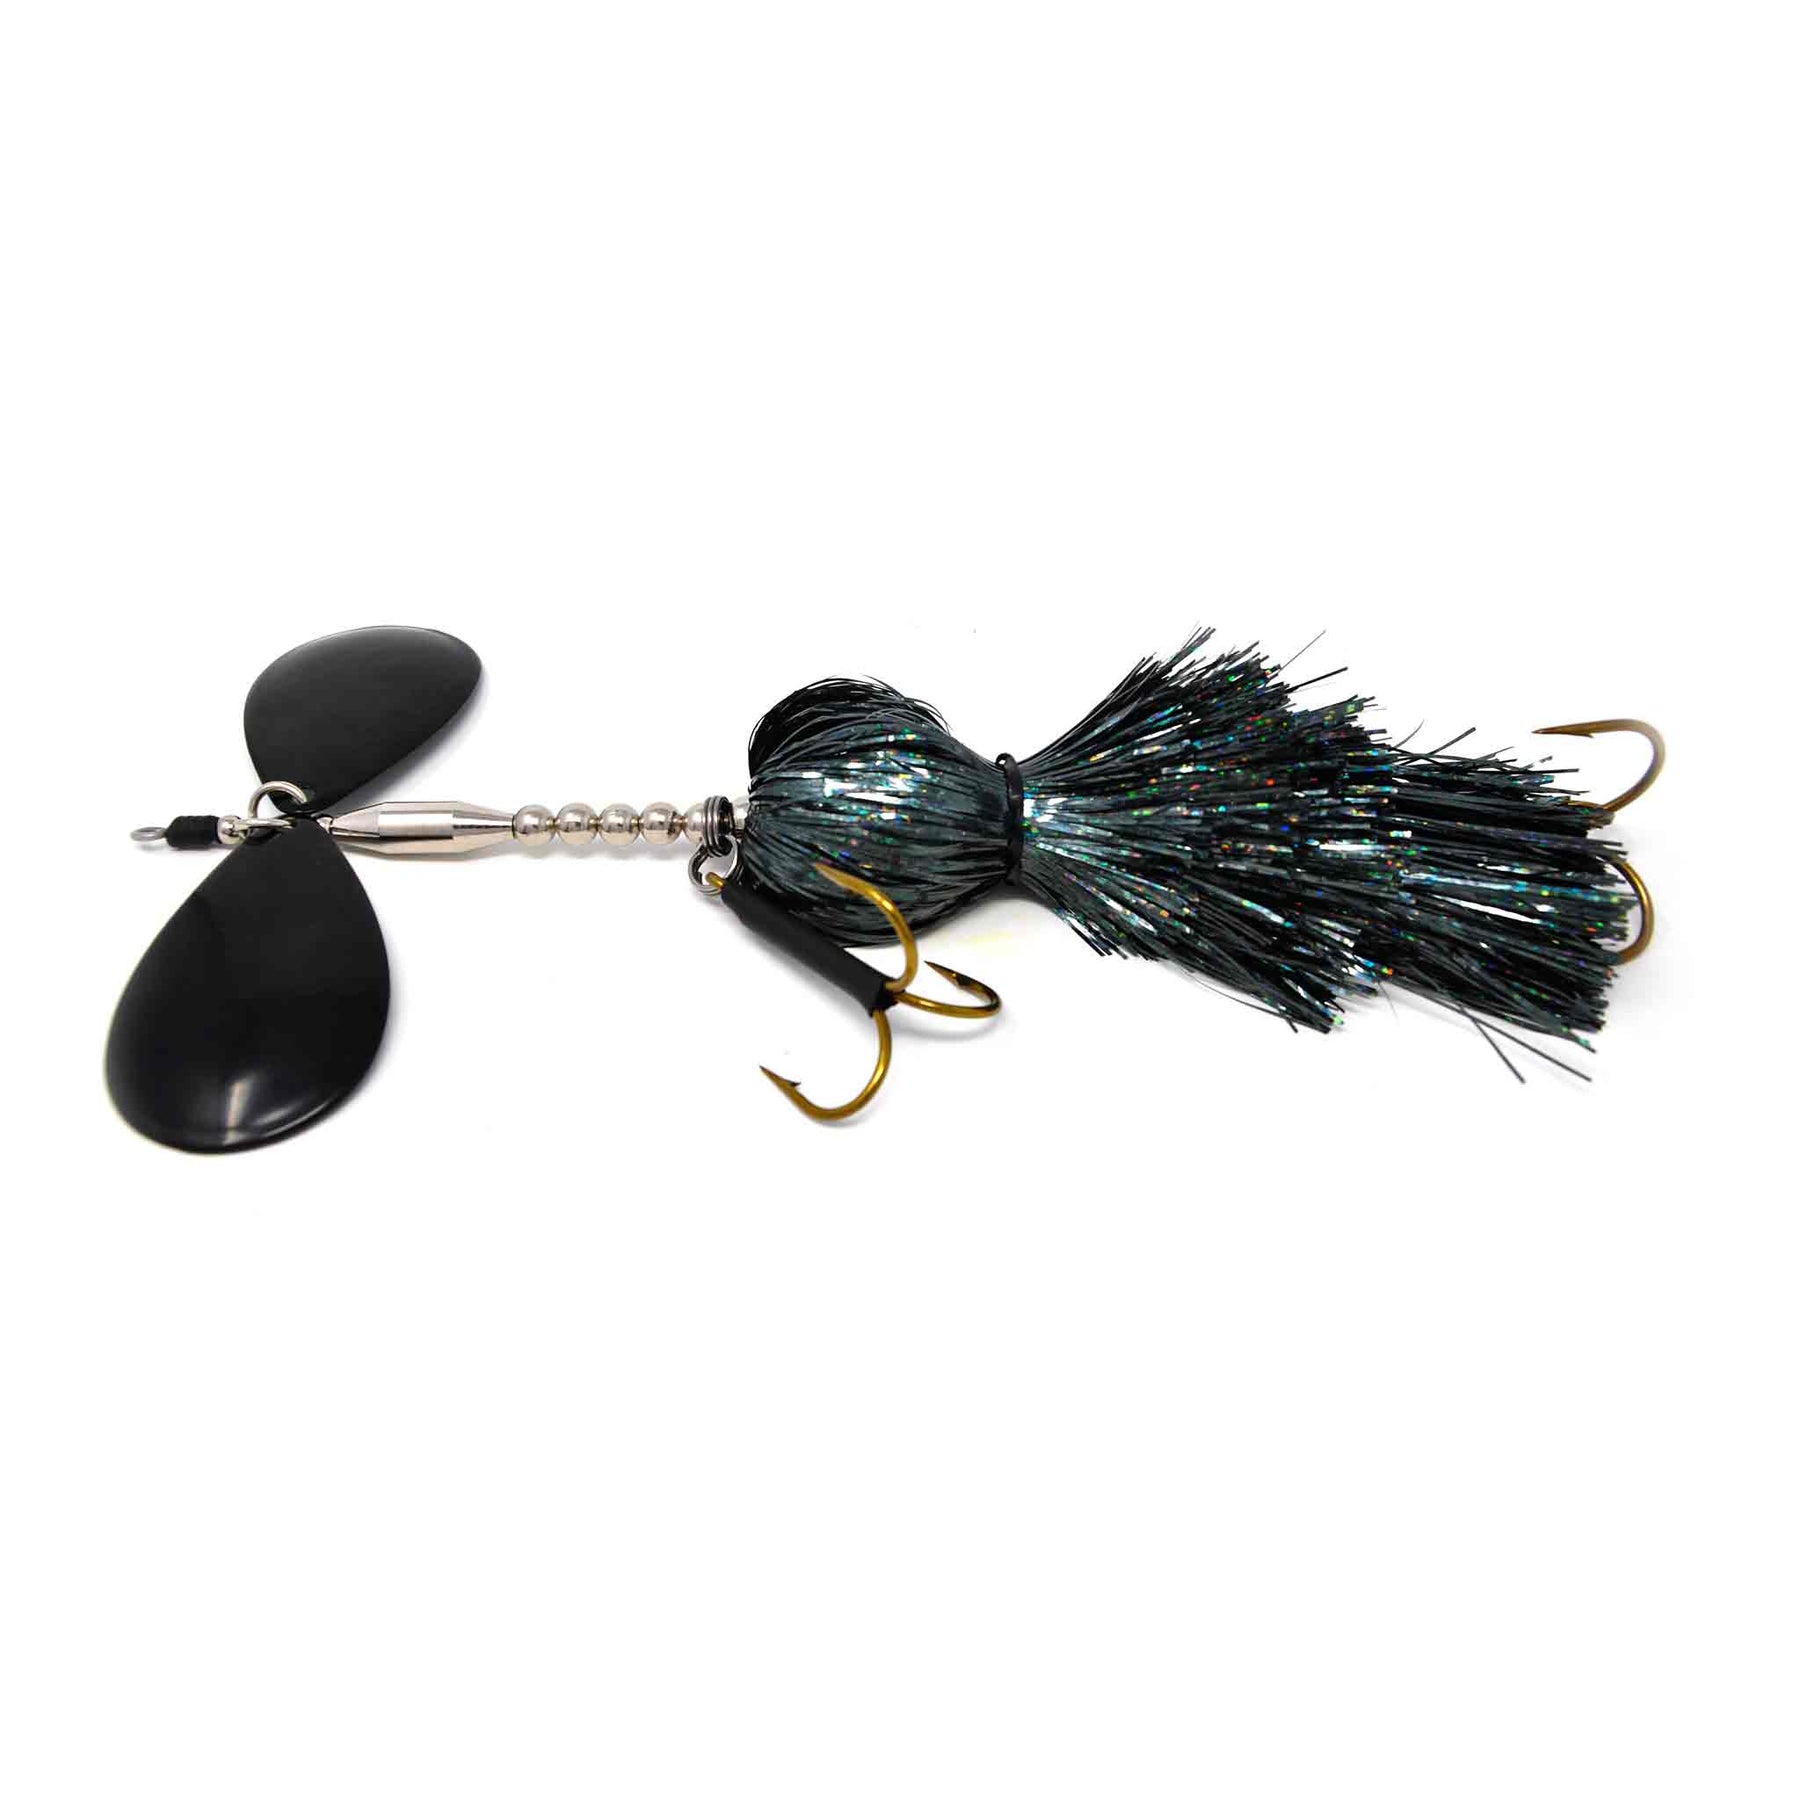 View of Bucktails Mad Chasse Regular Double Colorado 10/10 Bucktail Black Shiner TMS available at EZOKO Pike and Musky Shop